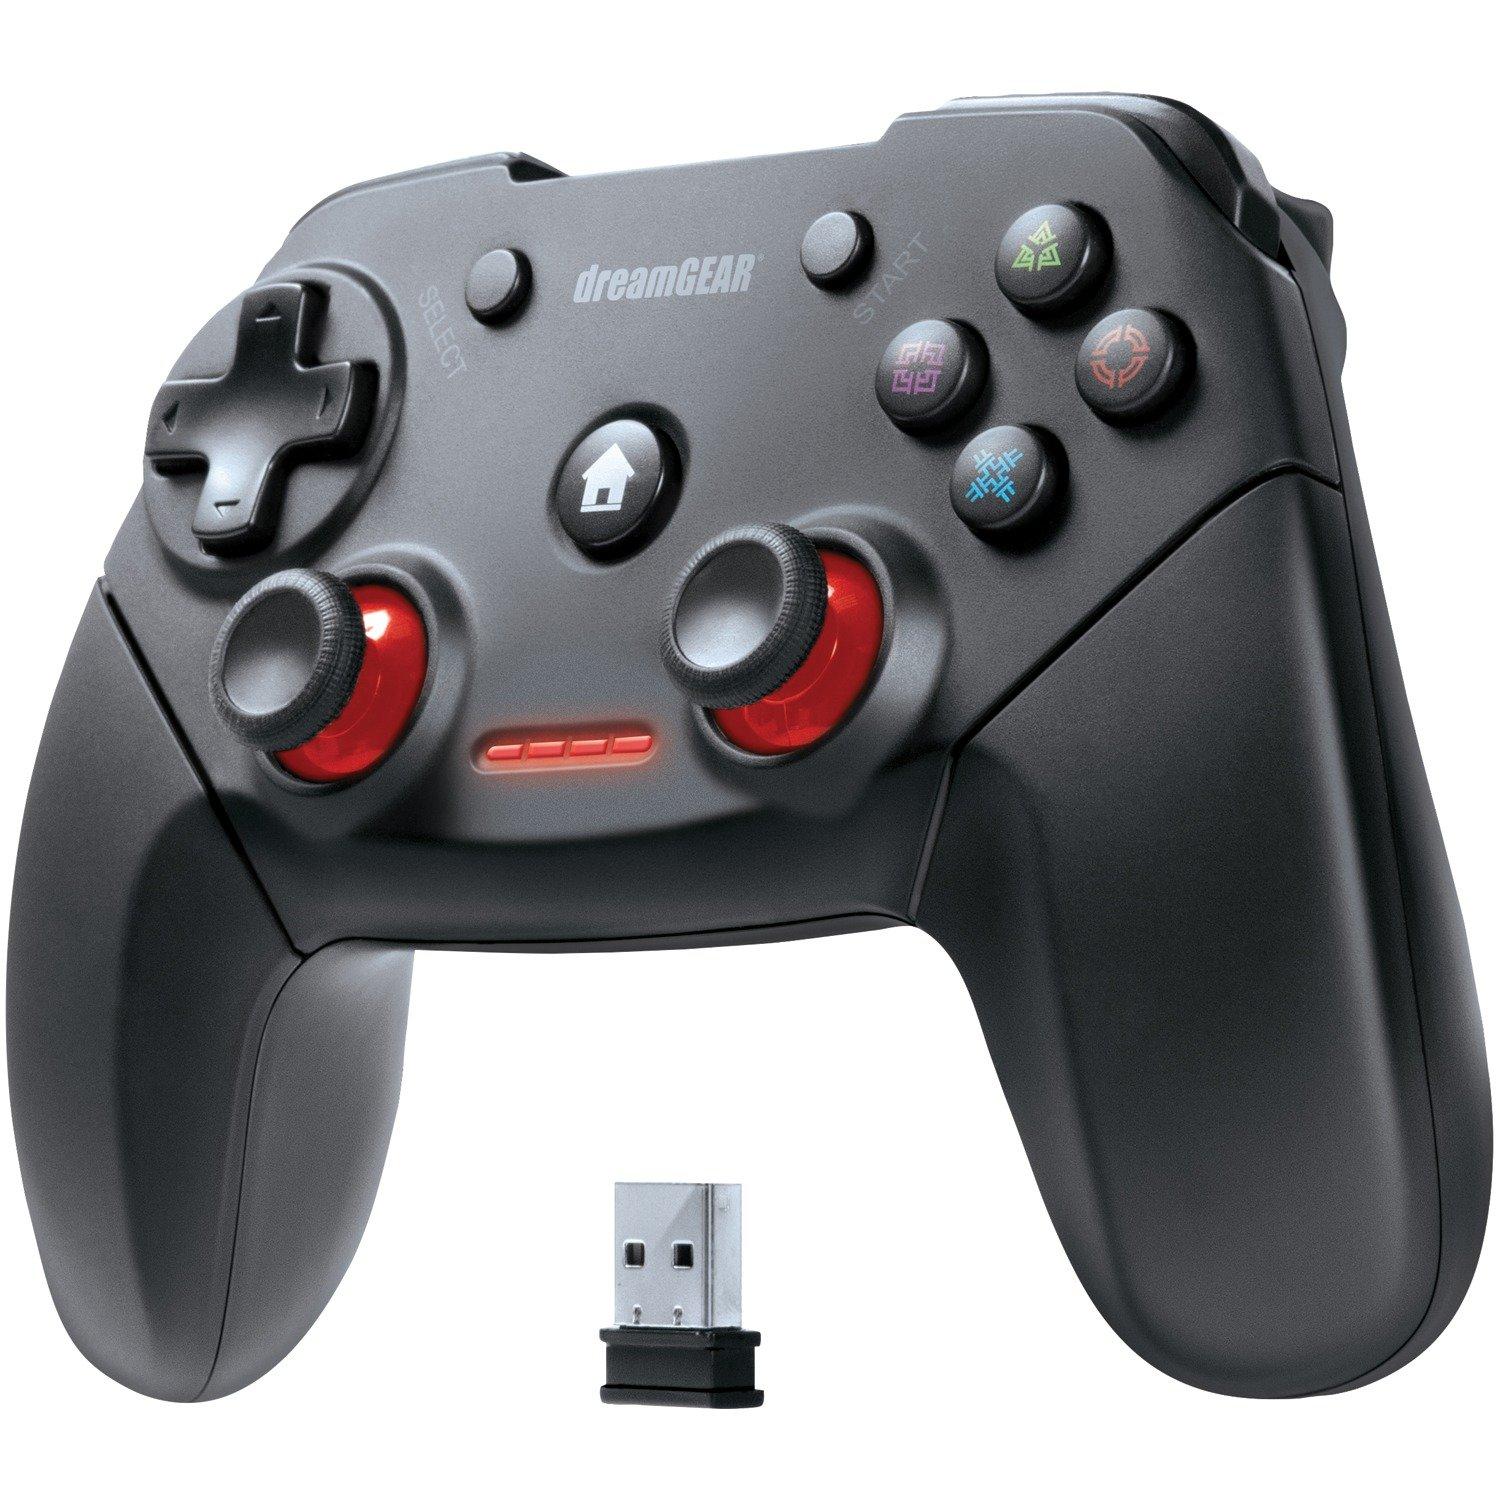 Shadow Pro Wireless Controller for PlayStation 3 and PC